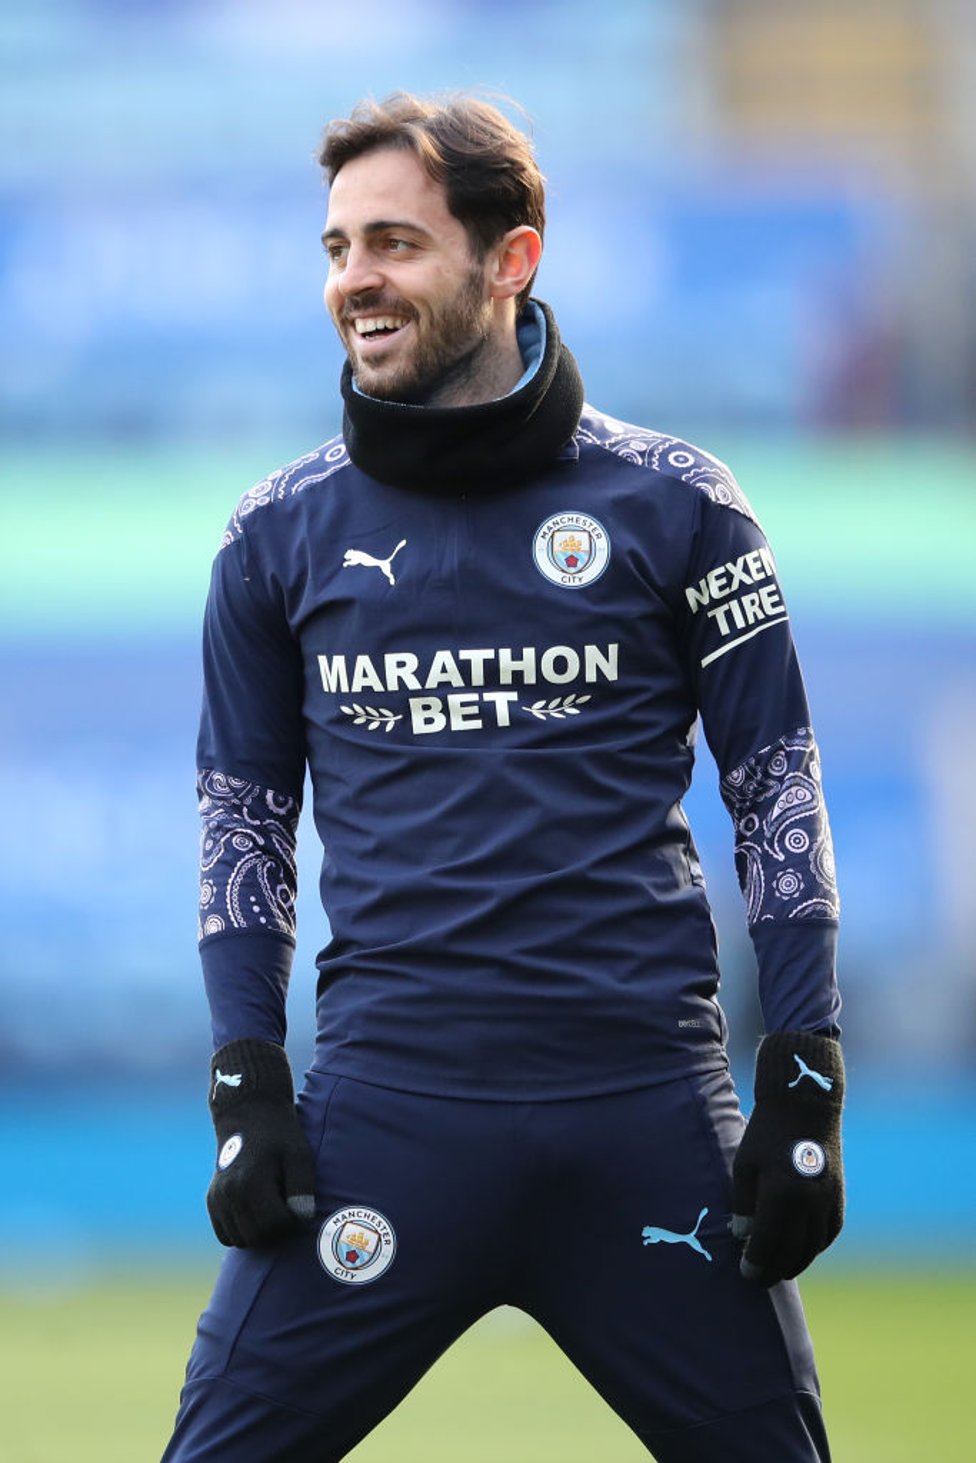 SMILEY SILVA : Bernardo is all smiles during the pre-match warm up.